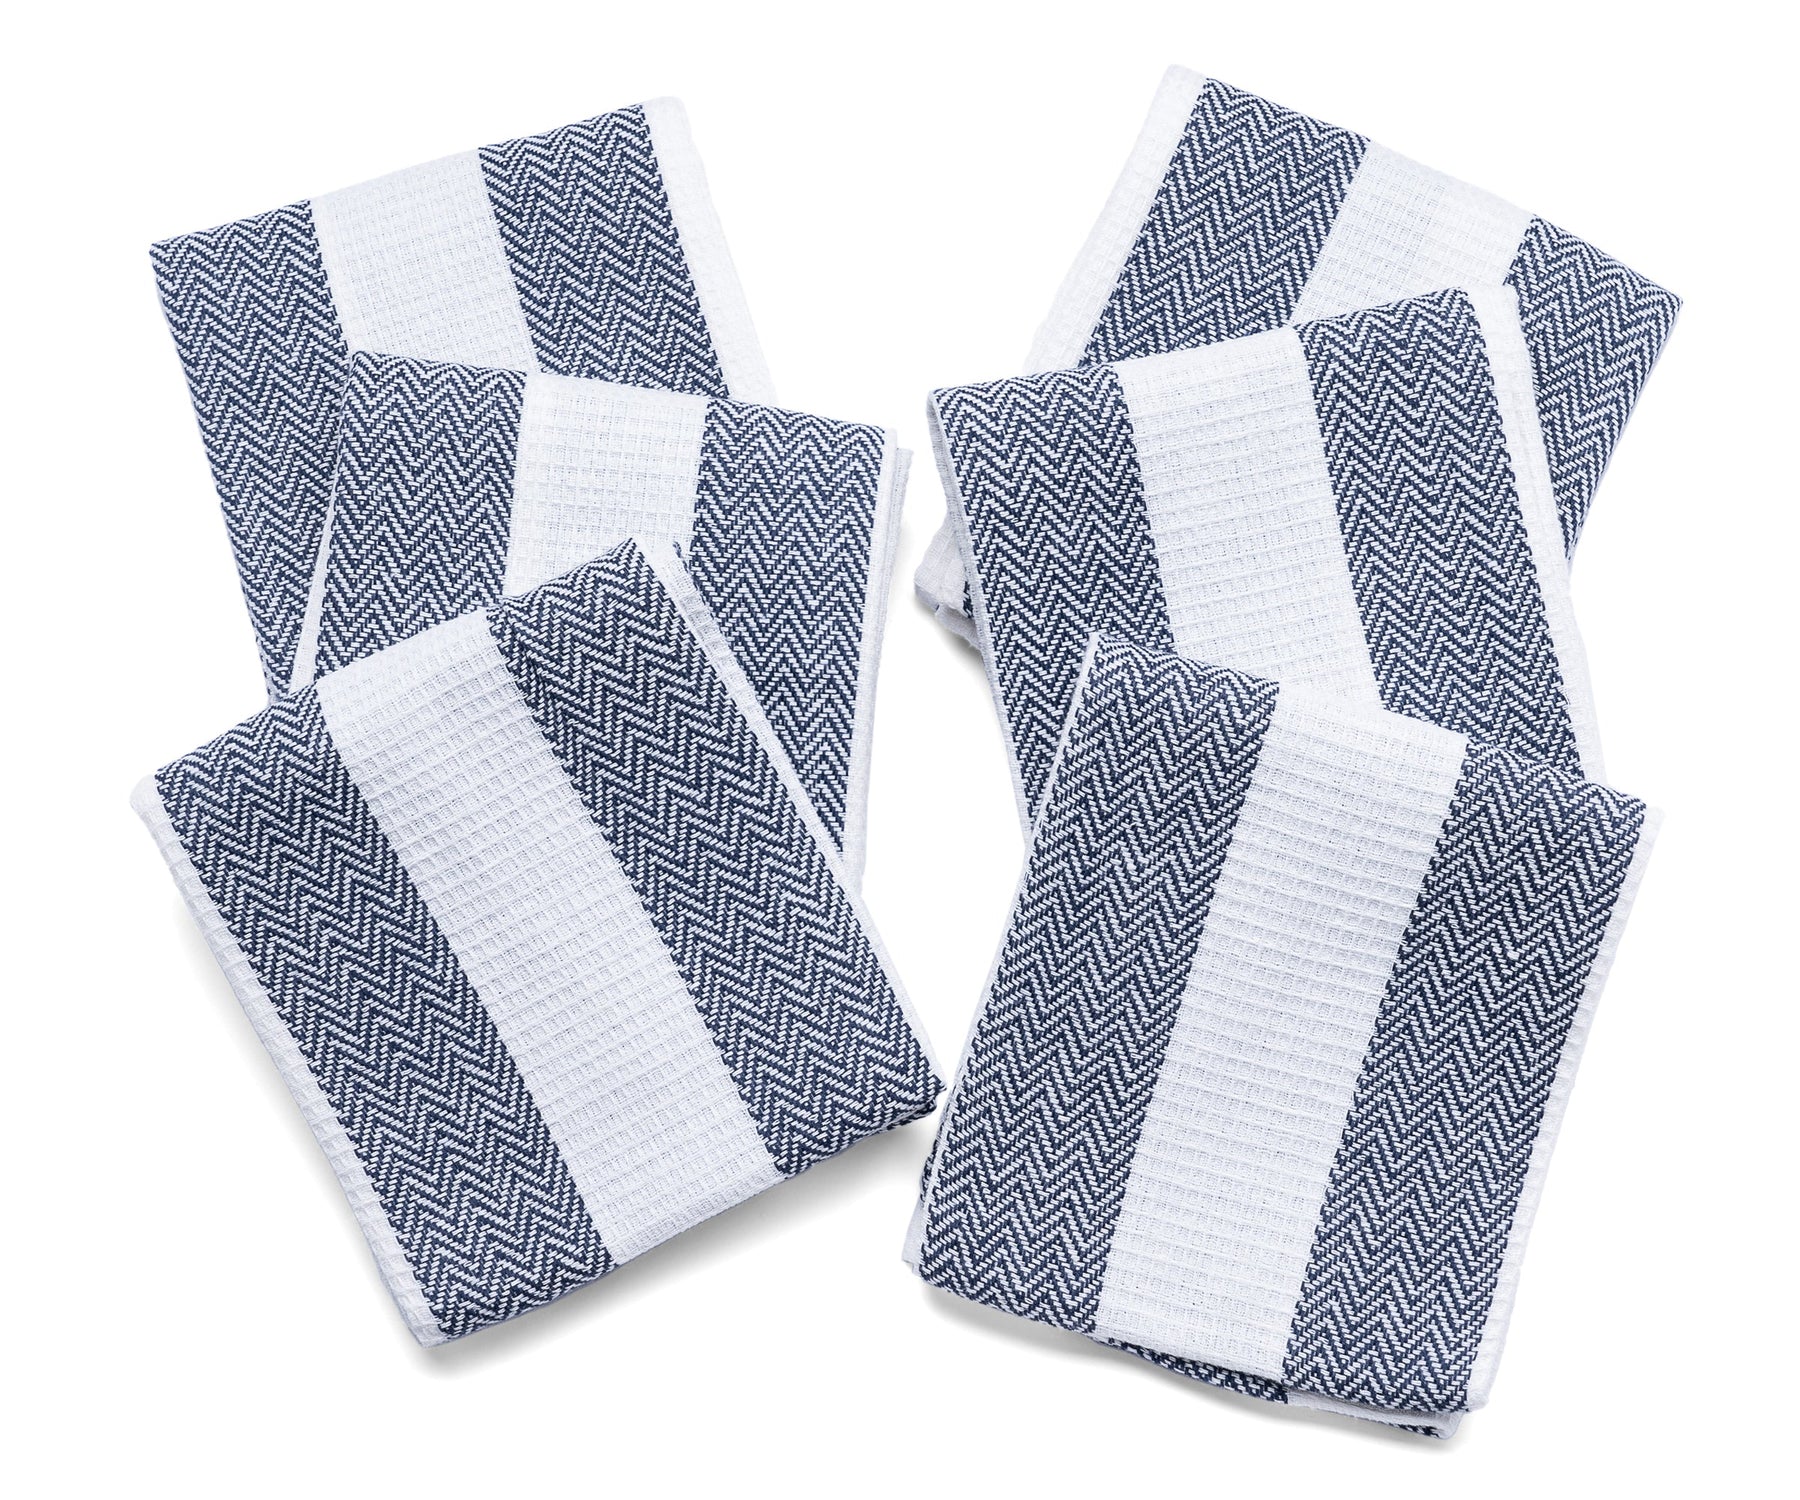 Cotton kitchen towels, perfect for drying dishes and hands.